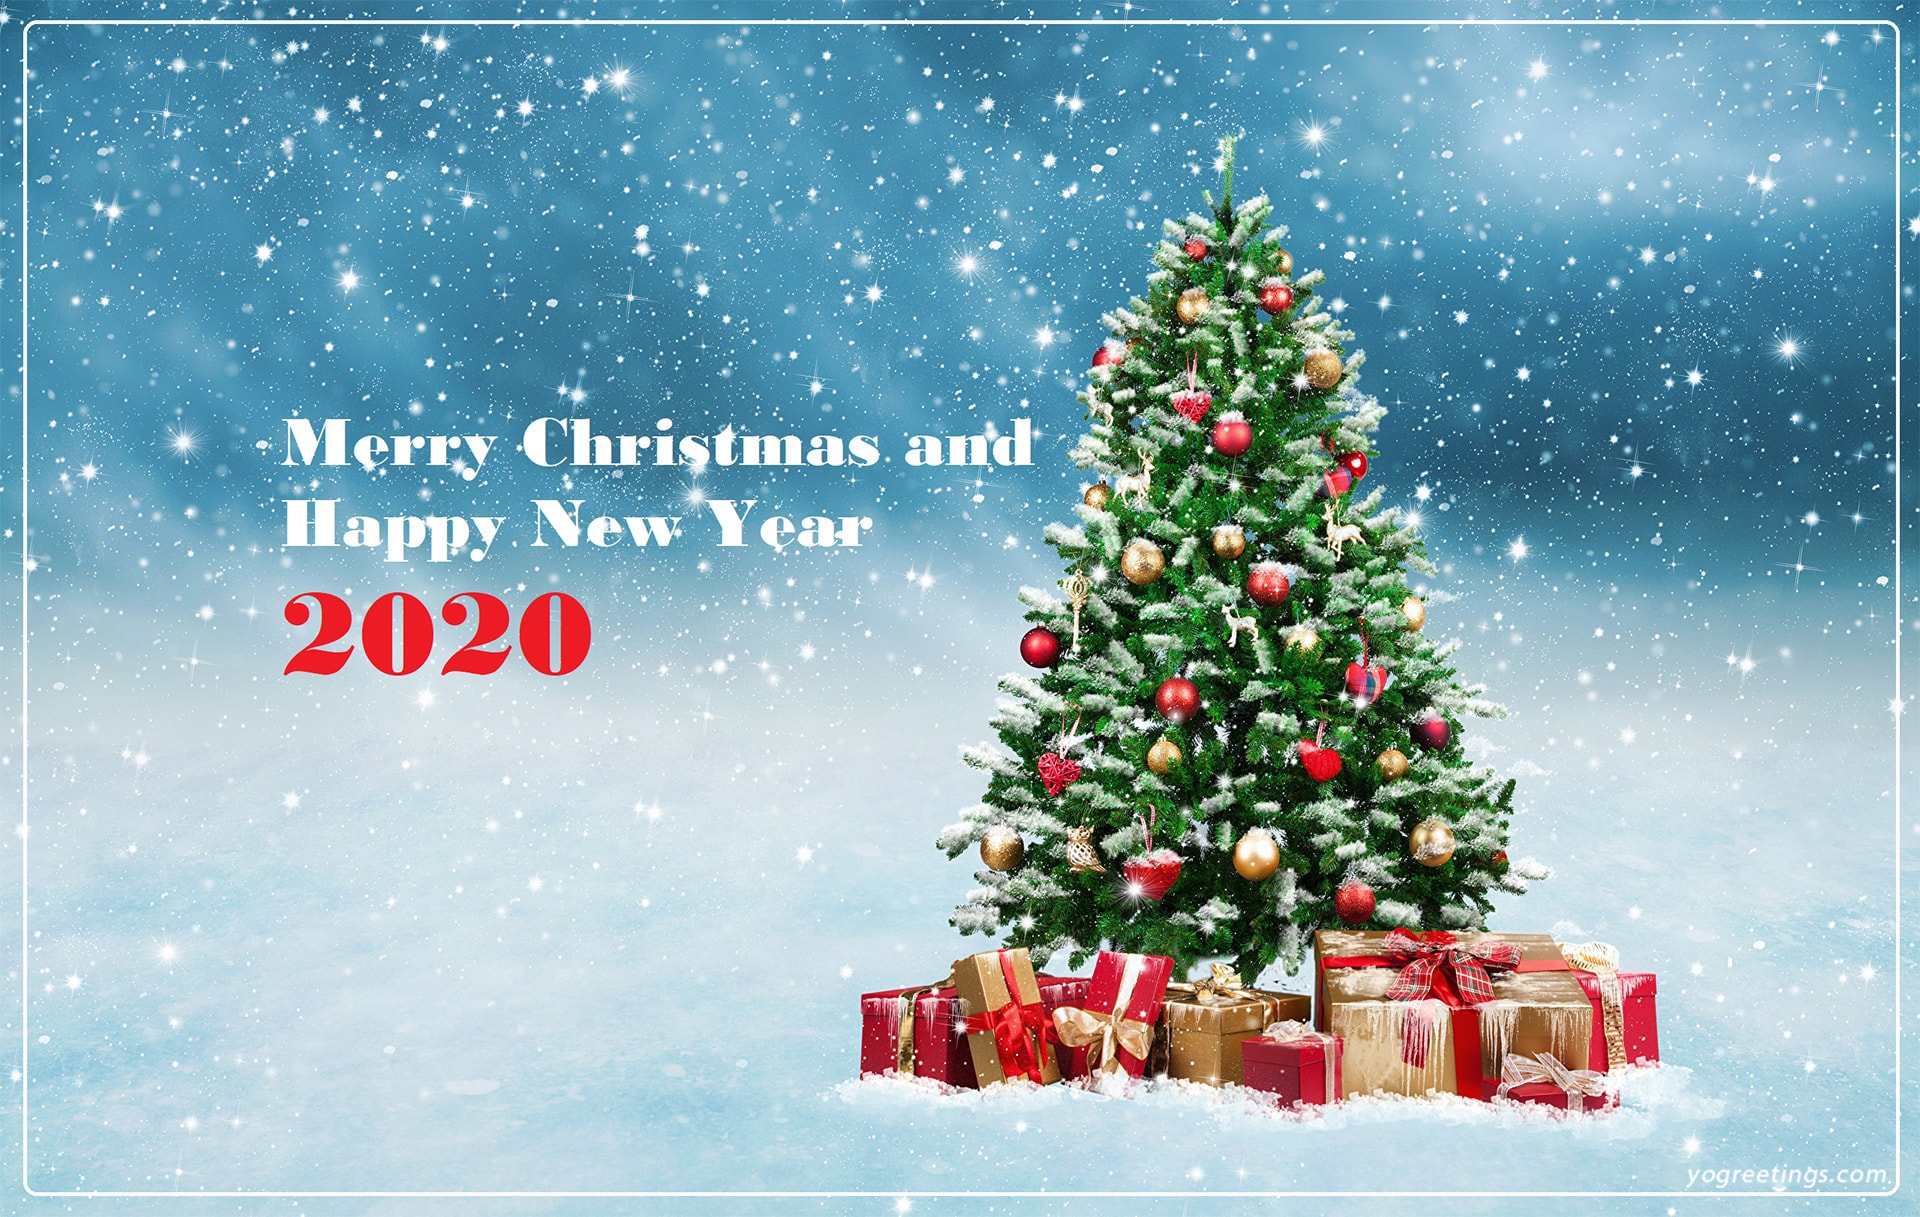 Merry Christmas Wallpaper Full HD Free Download - Images 4